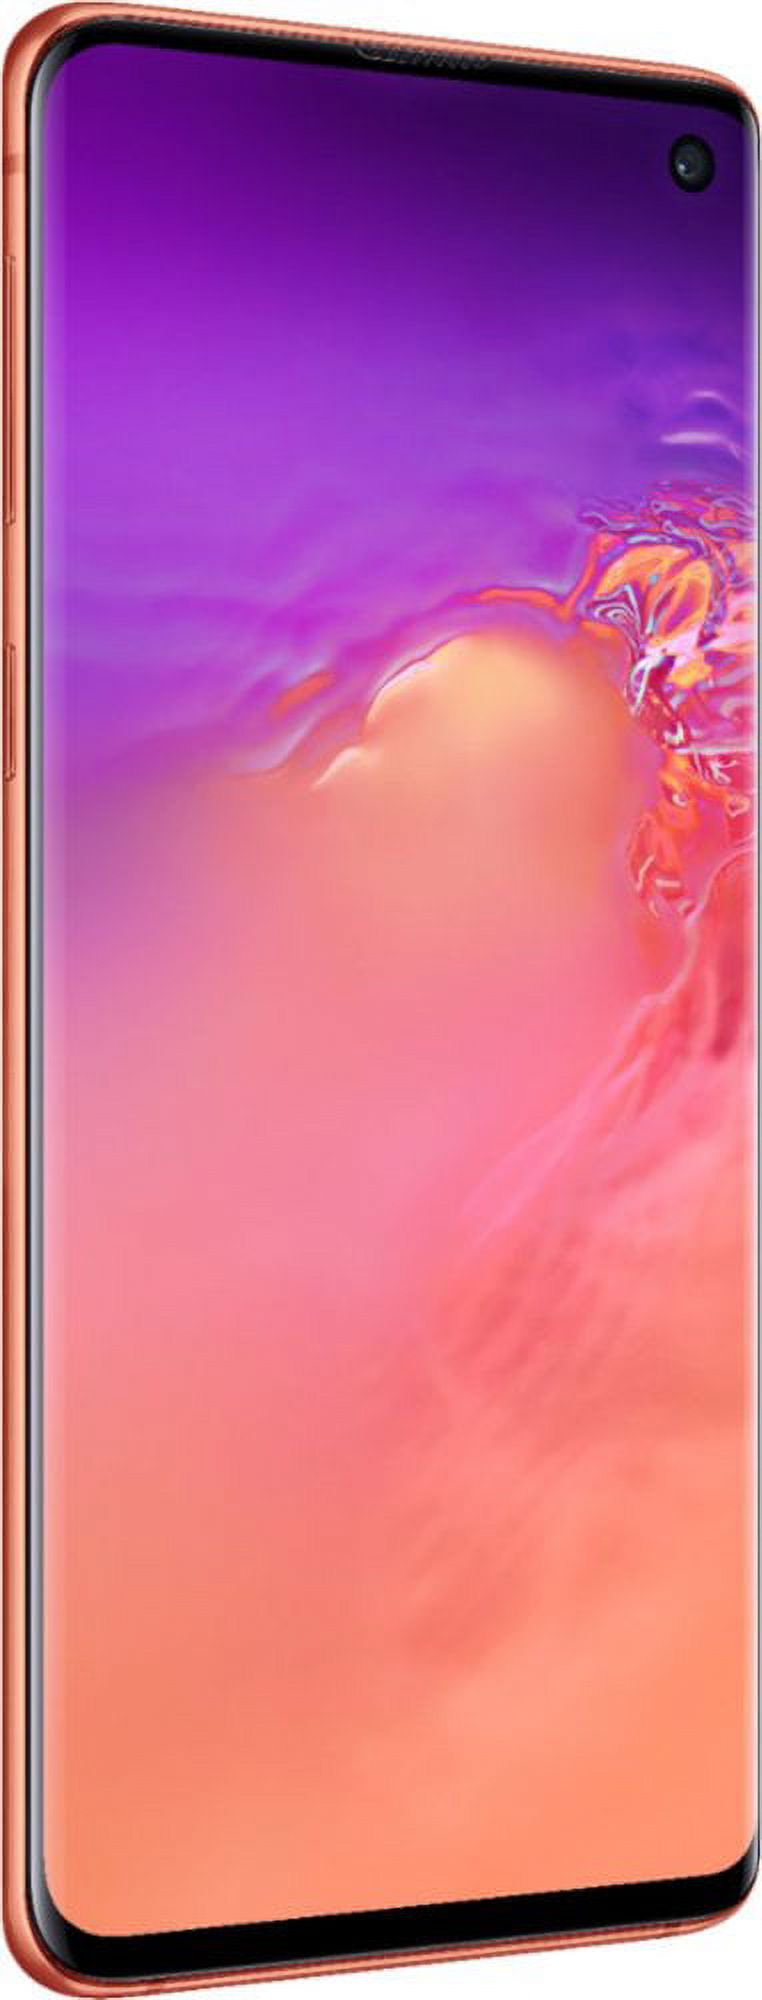 Pre-Owned Samsung GALAXY S10 SM-G973U1 128GB Pink (US Model) - Factory Unlocked Cell Phone (Refurbished: Like New) - image 4 of 6